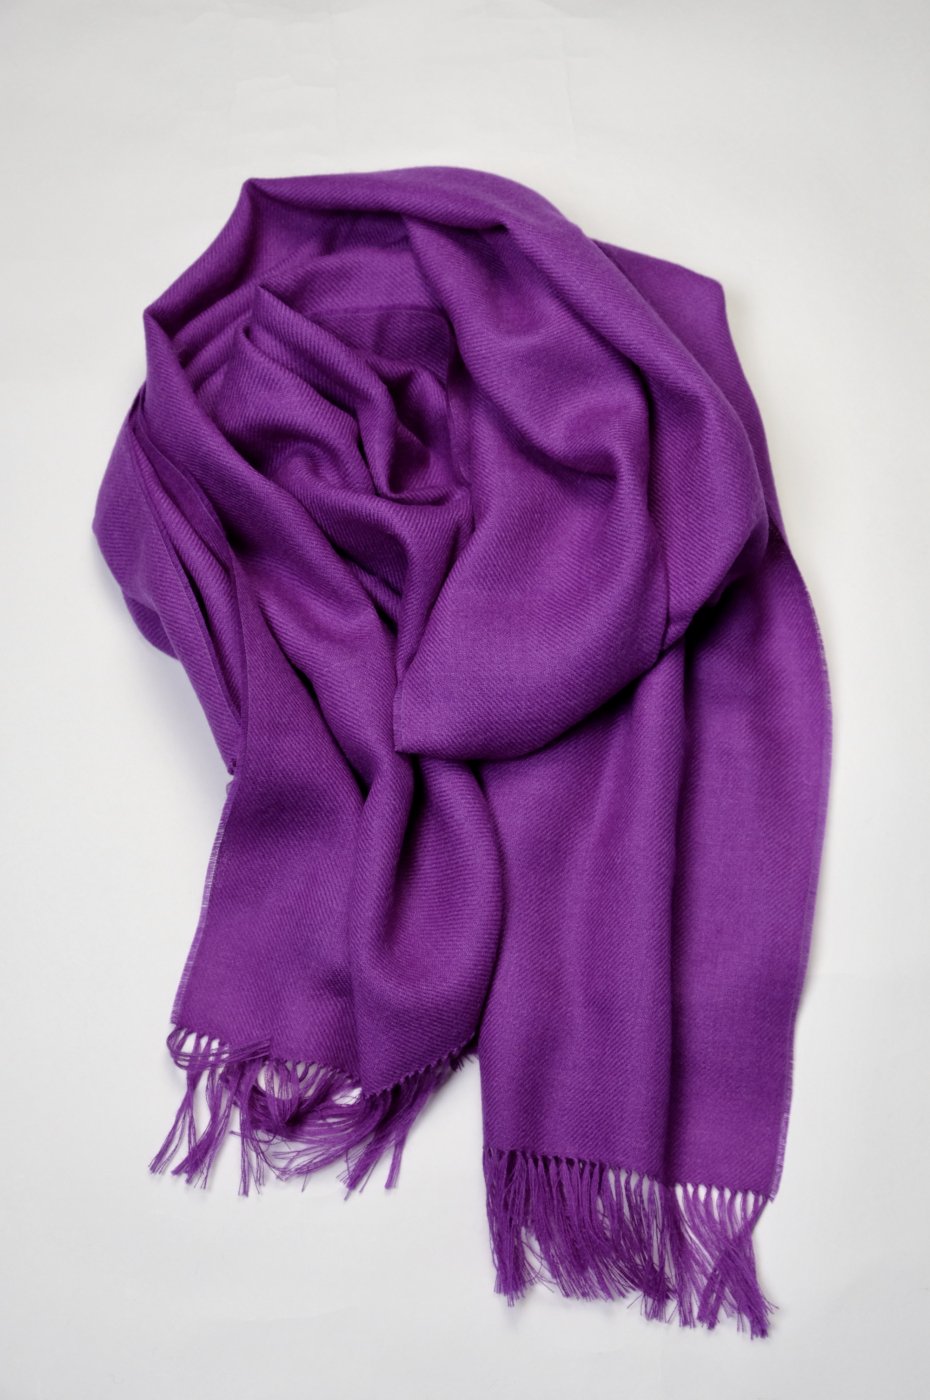 THE INOUE BROTHERS... "NON BRUSHED LARGE STOLE / PURPLE"